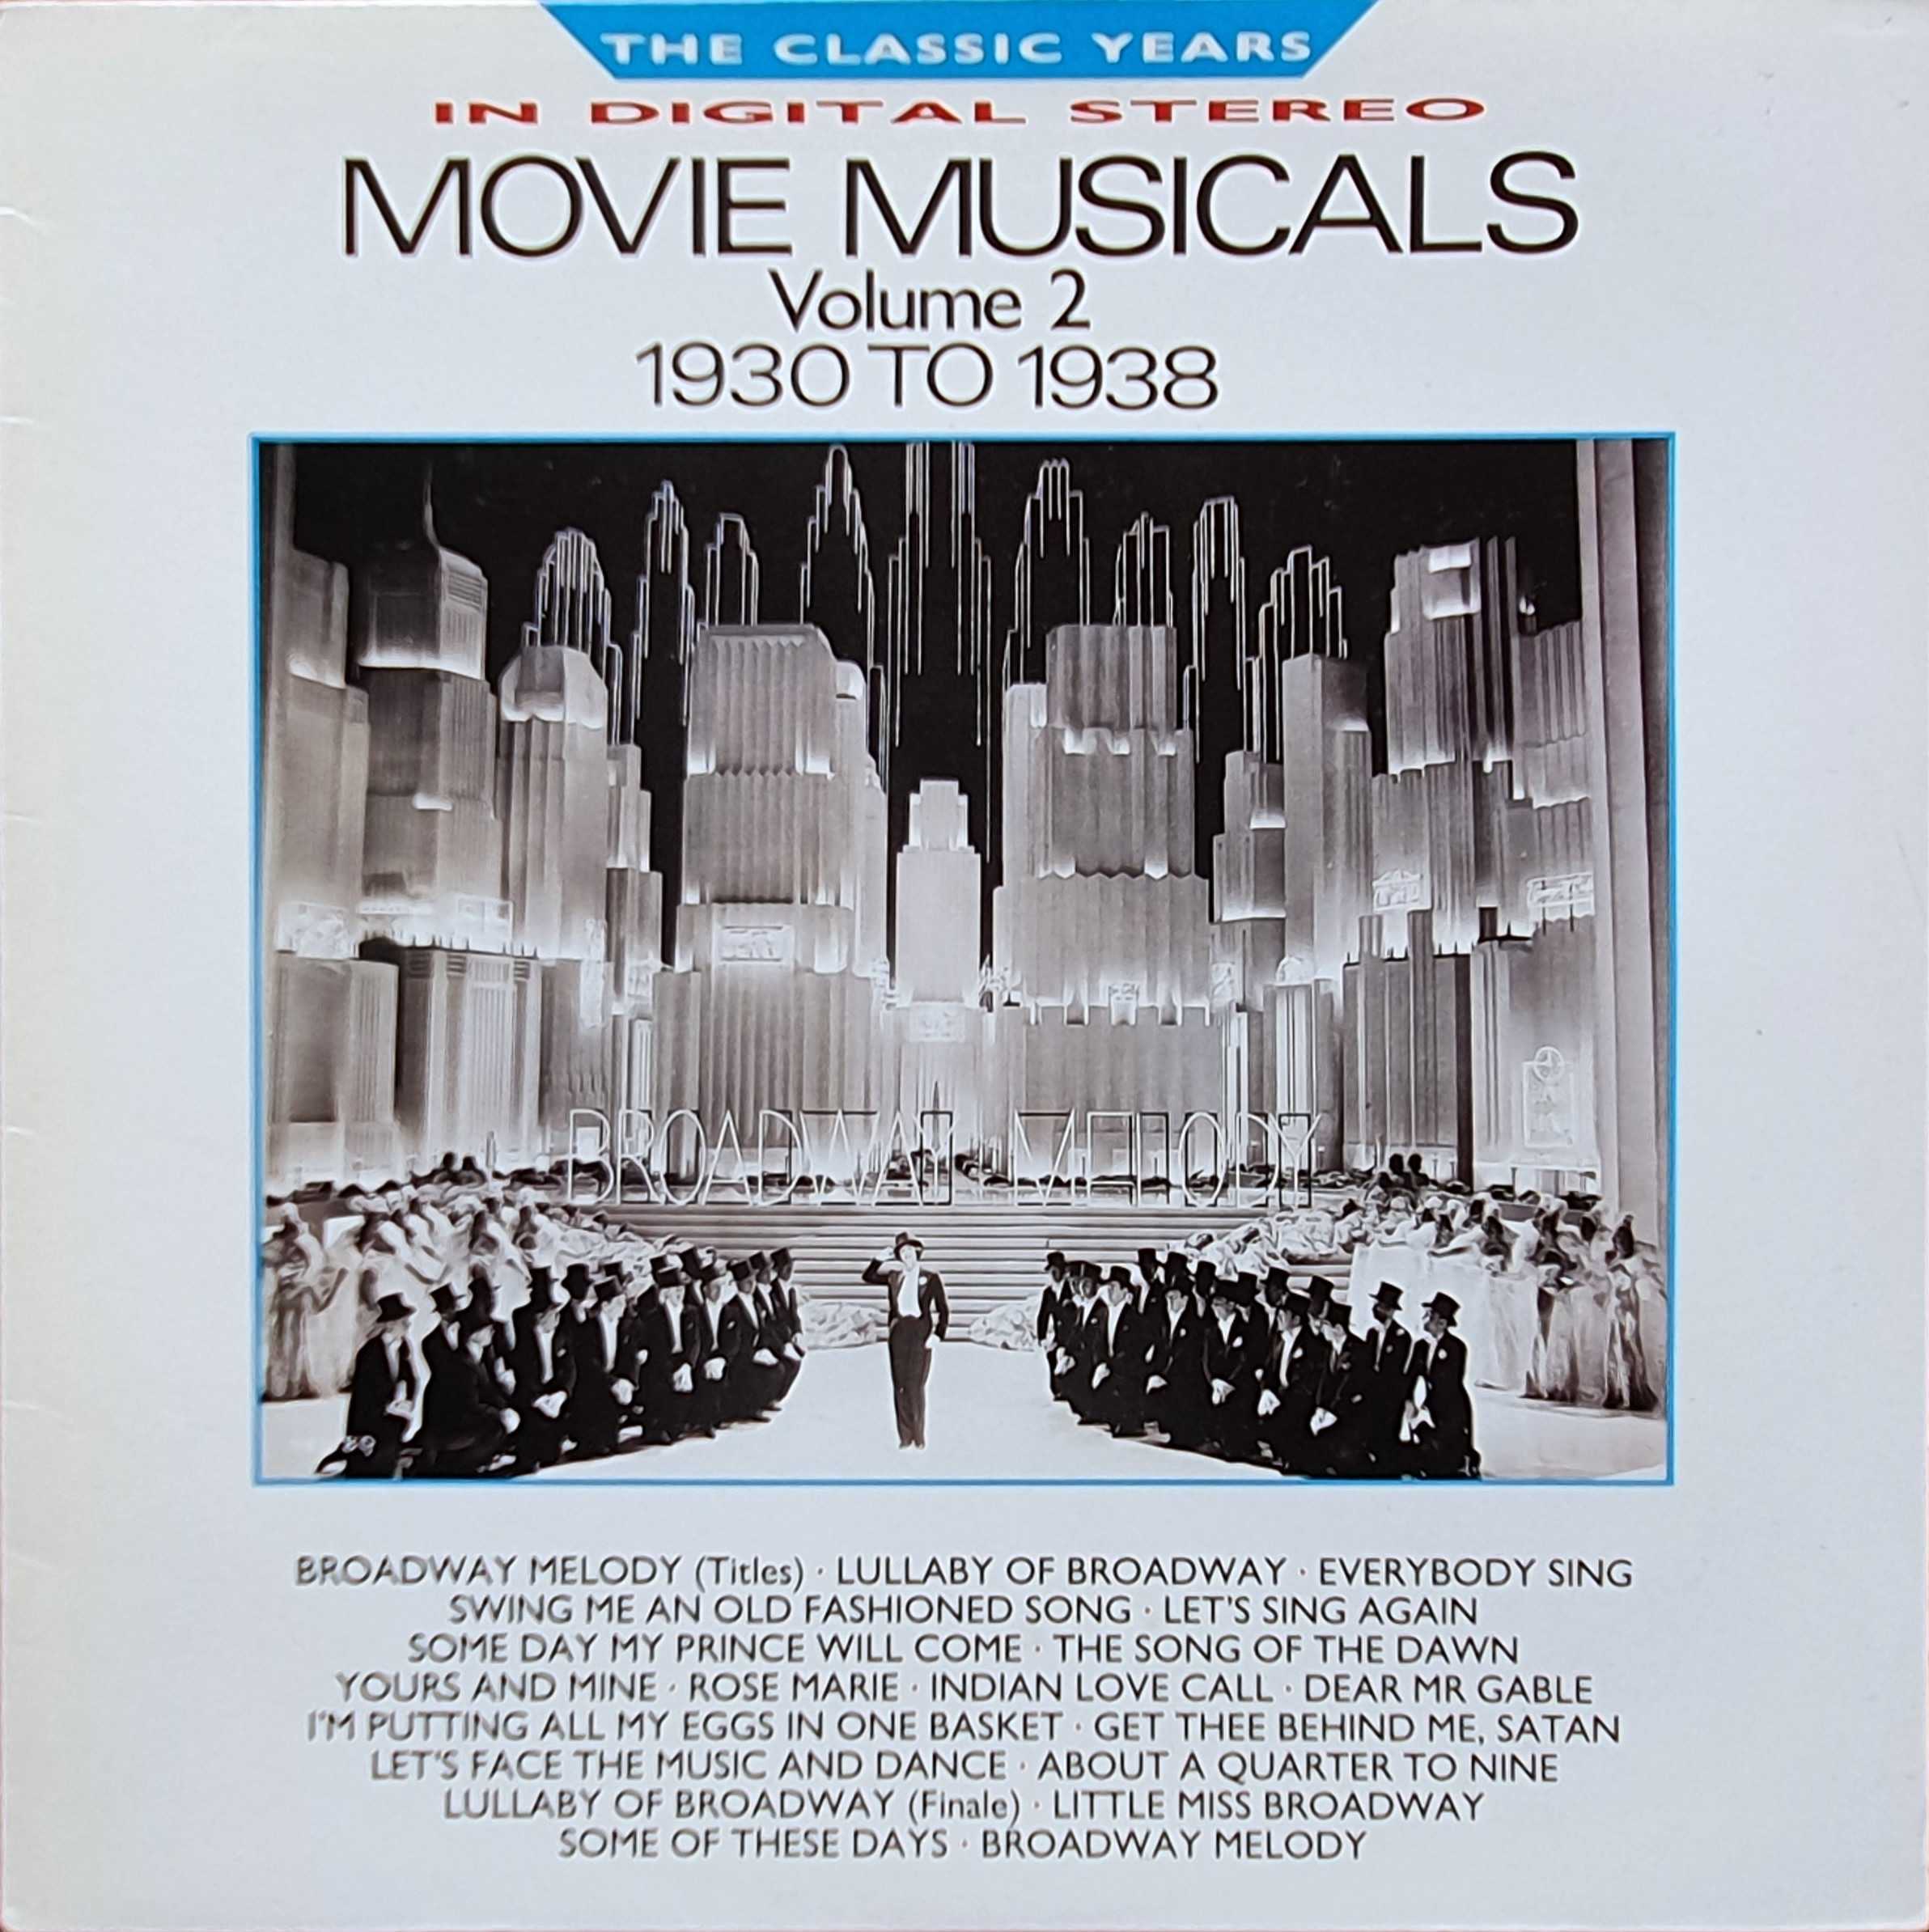 Picture of REB 767 Classic years - Movie musicals 1930 - 1938 by artist Various from the BBC albums - Records and Tapes library